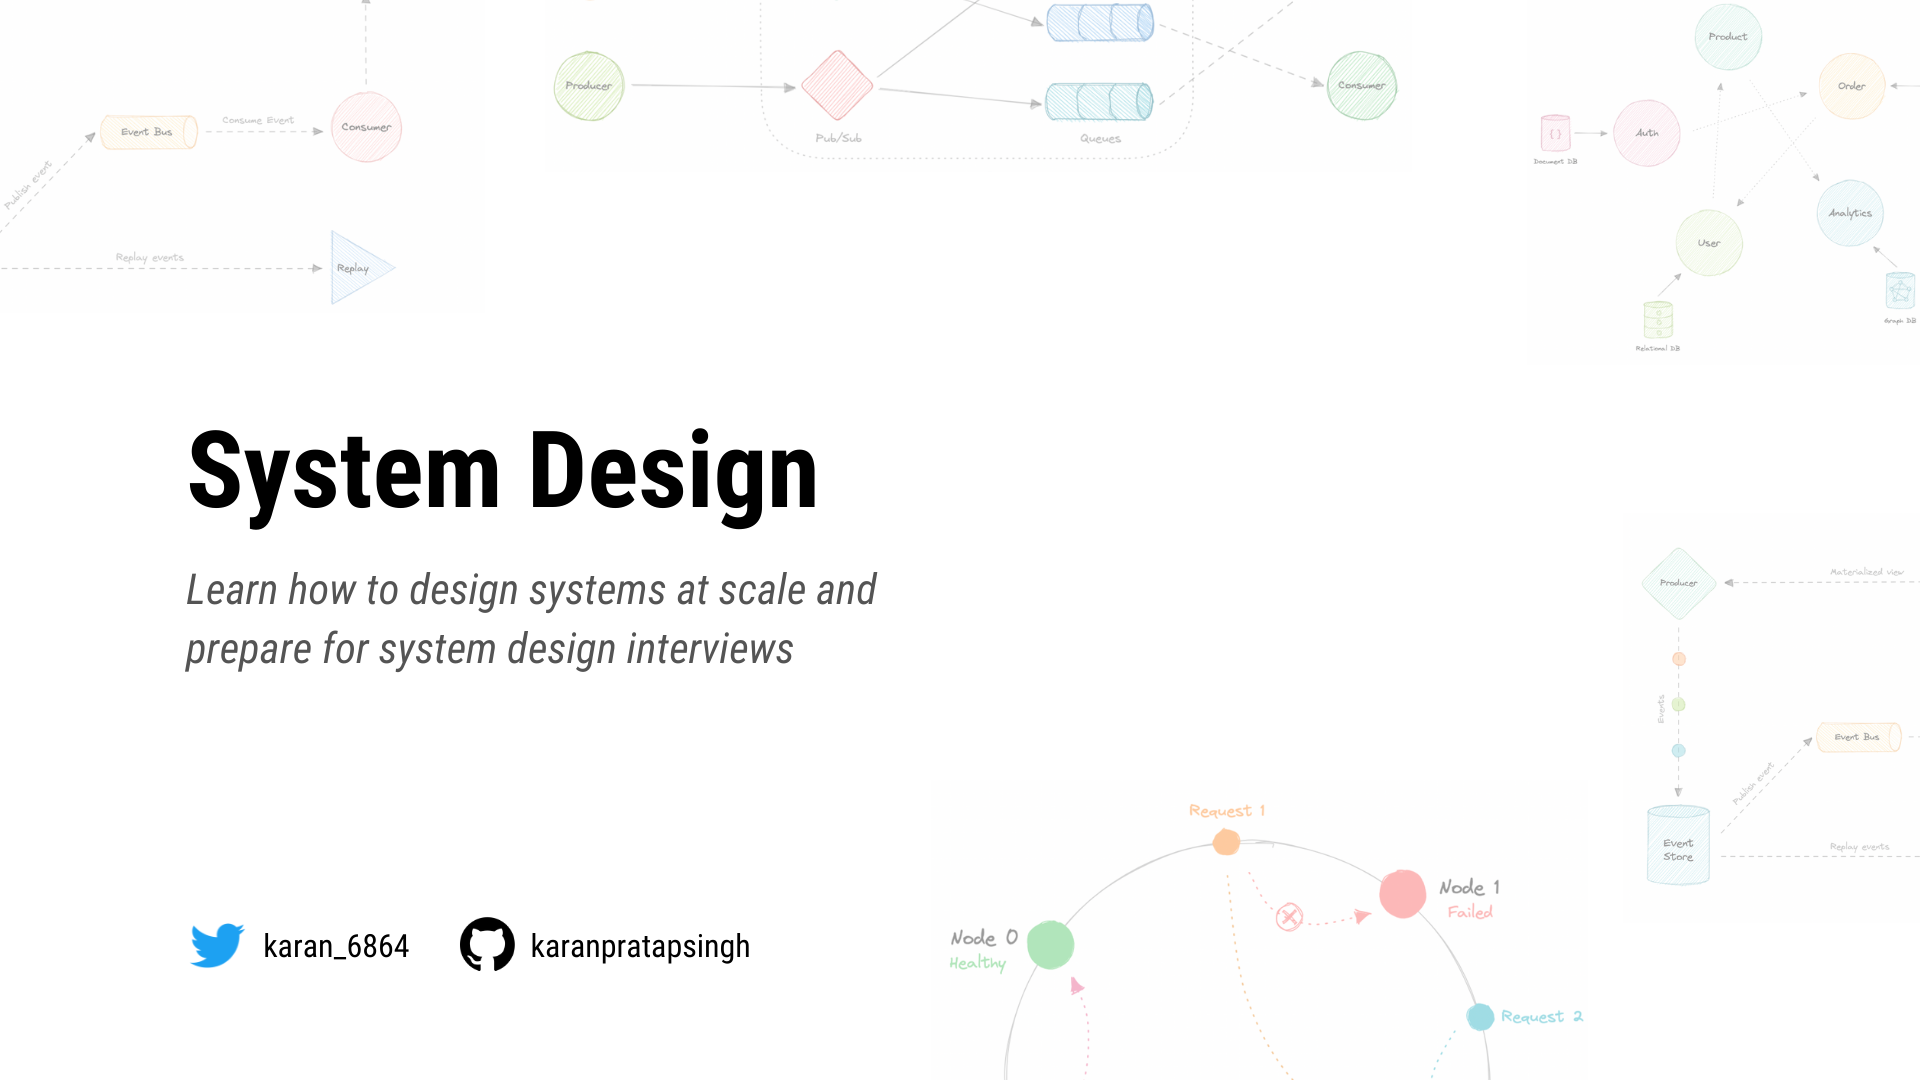 System Design: The complete course